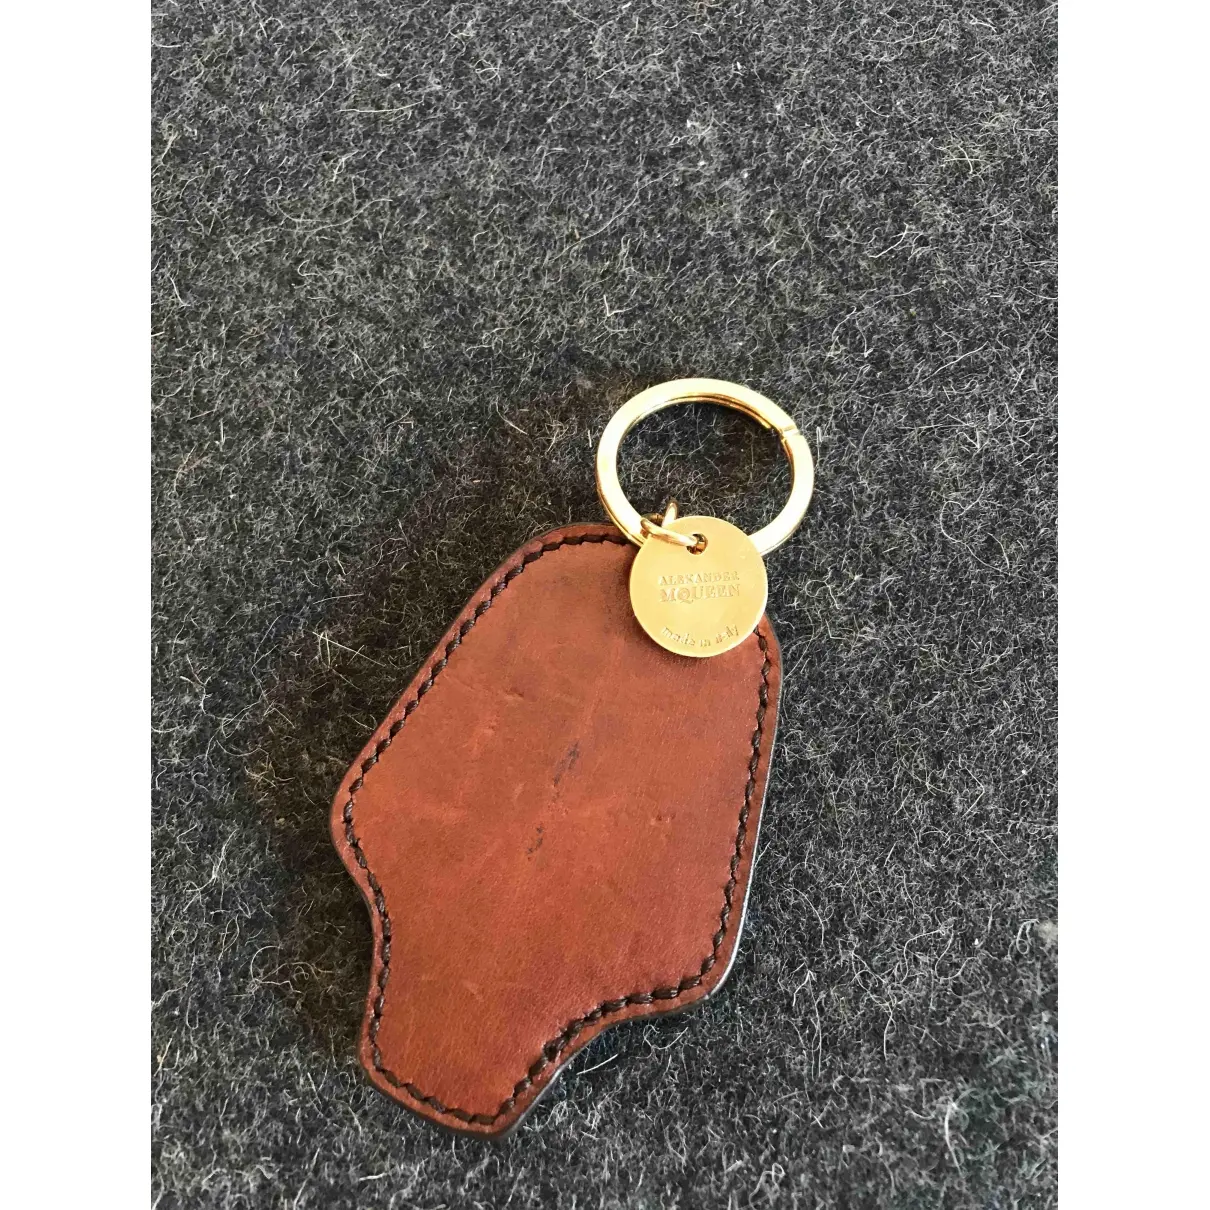 Alexander McQueen Leather bag charm for sale